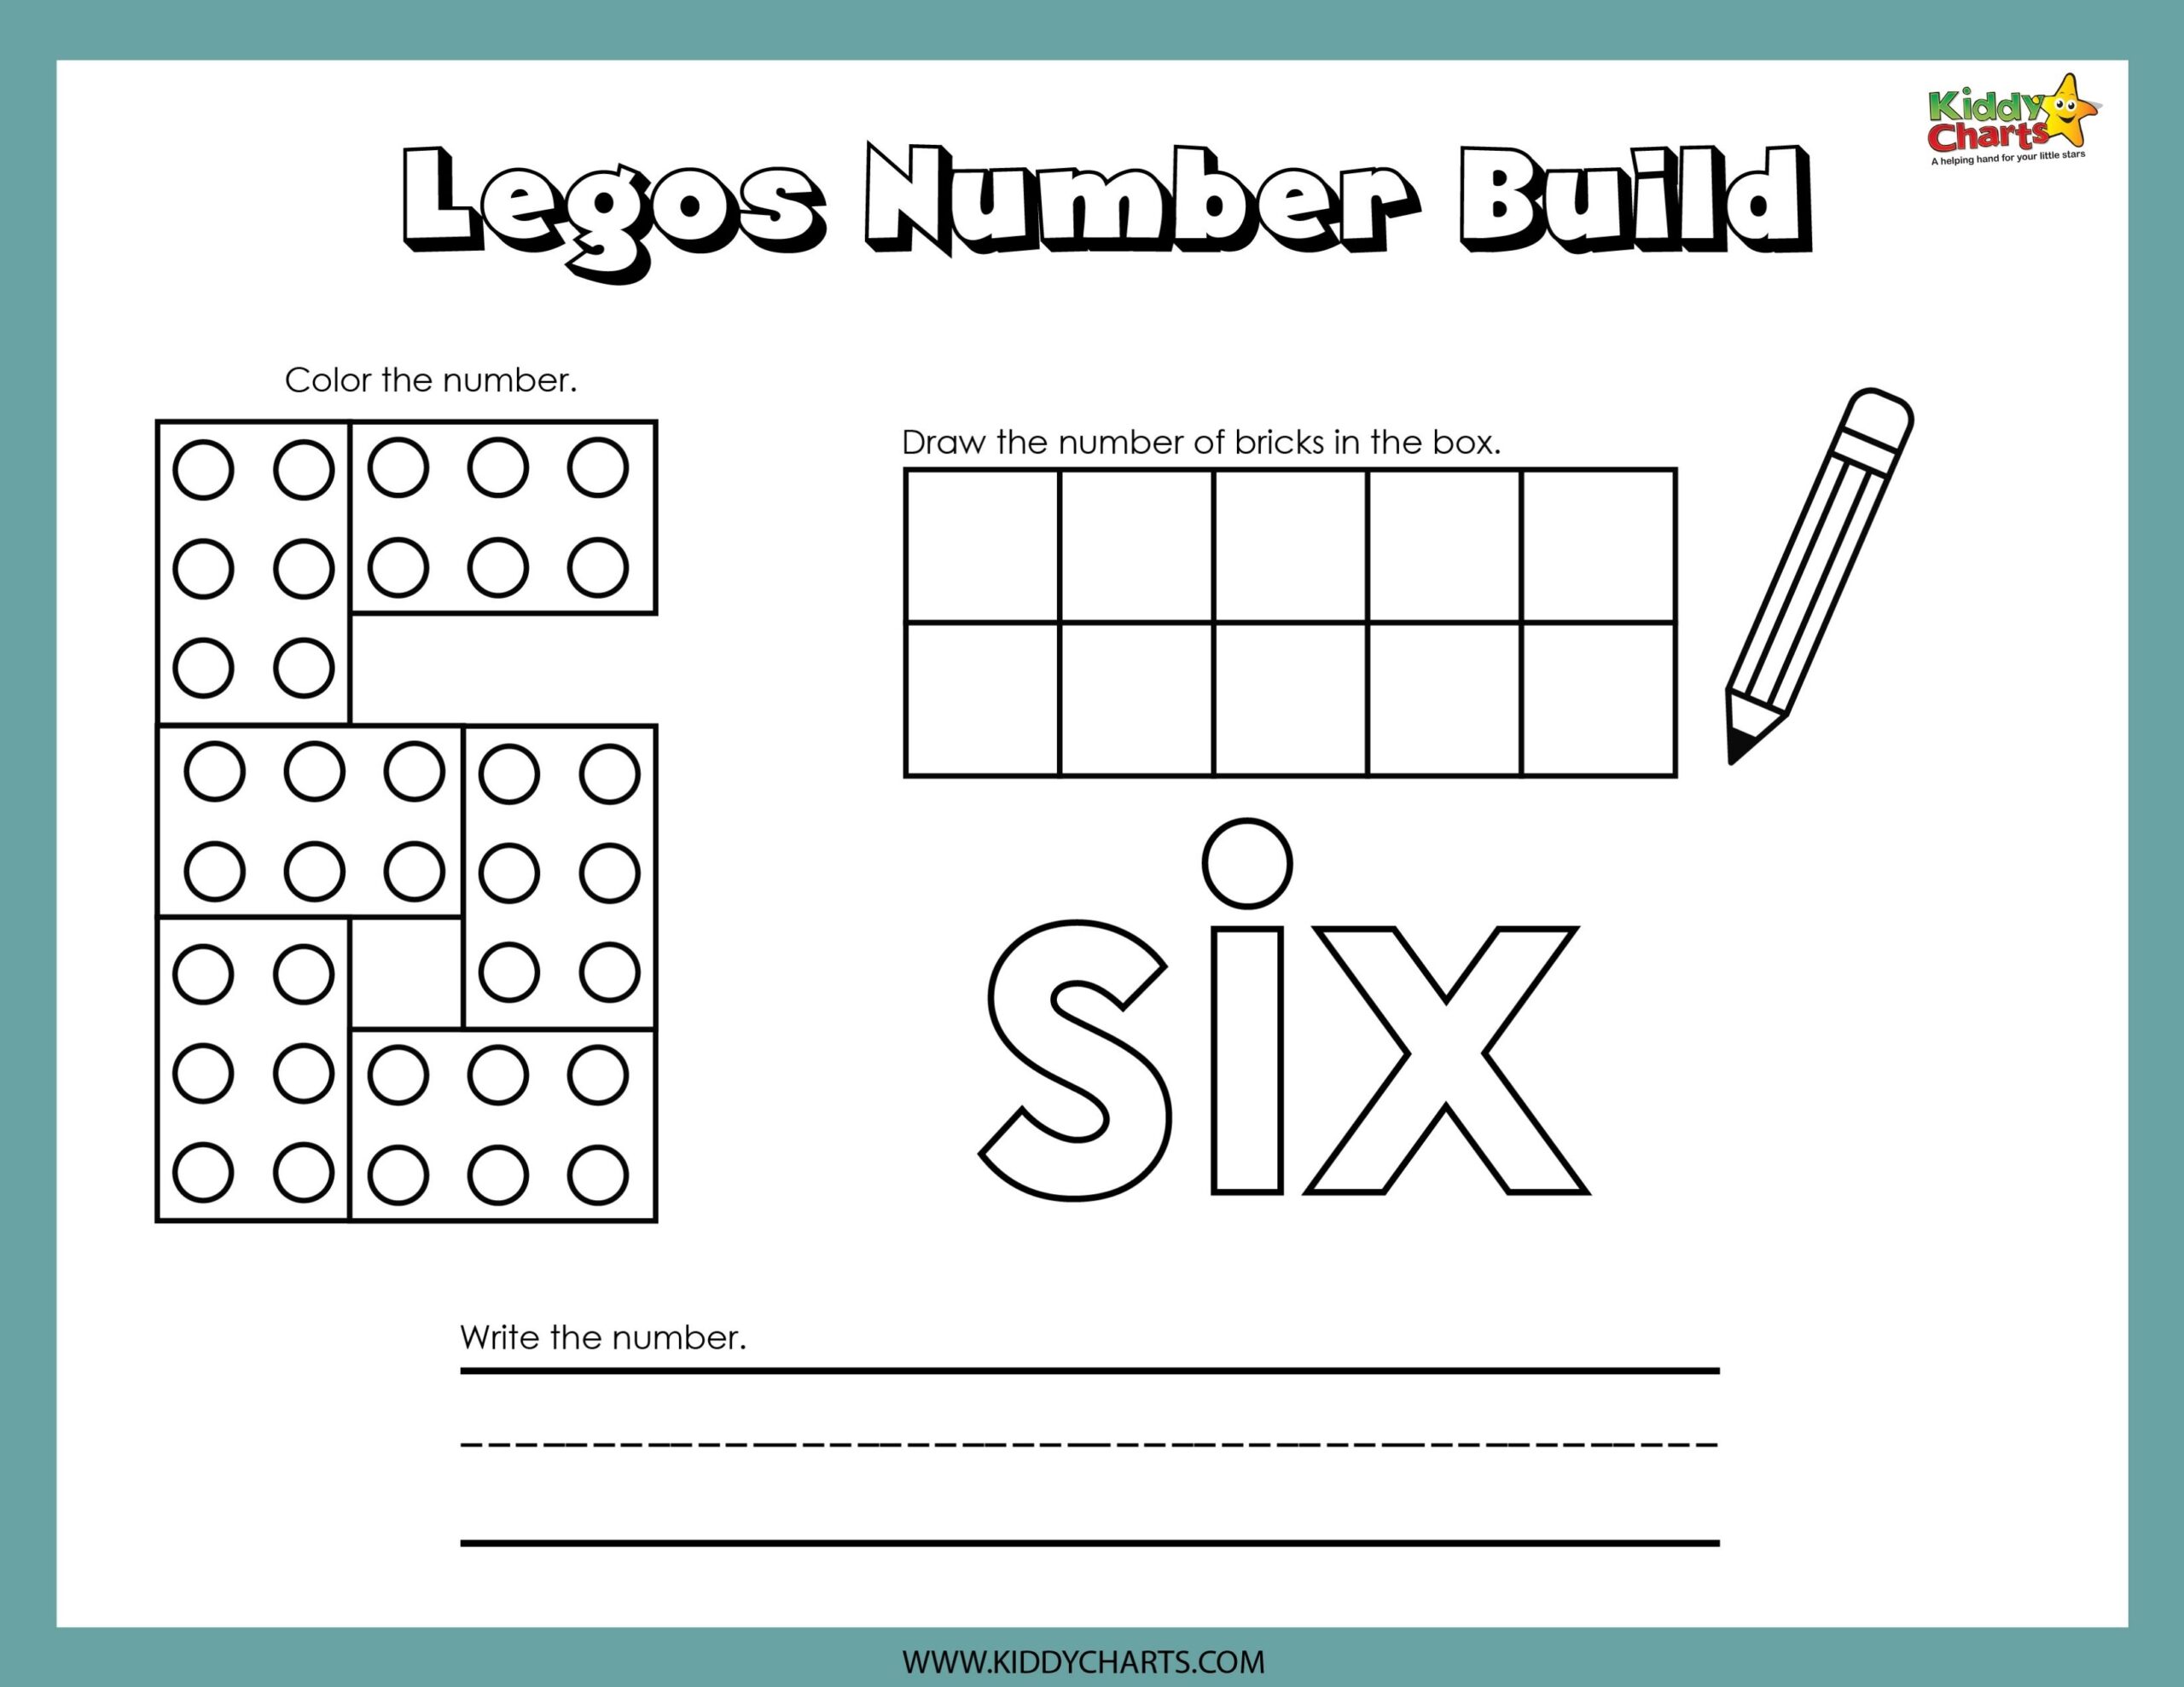 Lego Numbers Building Activity six